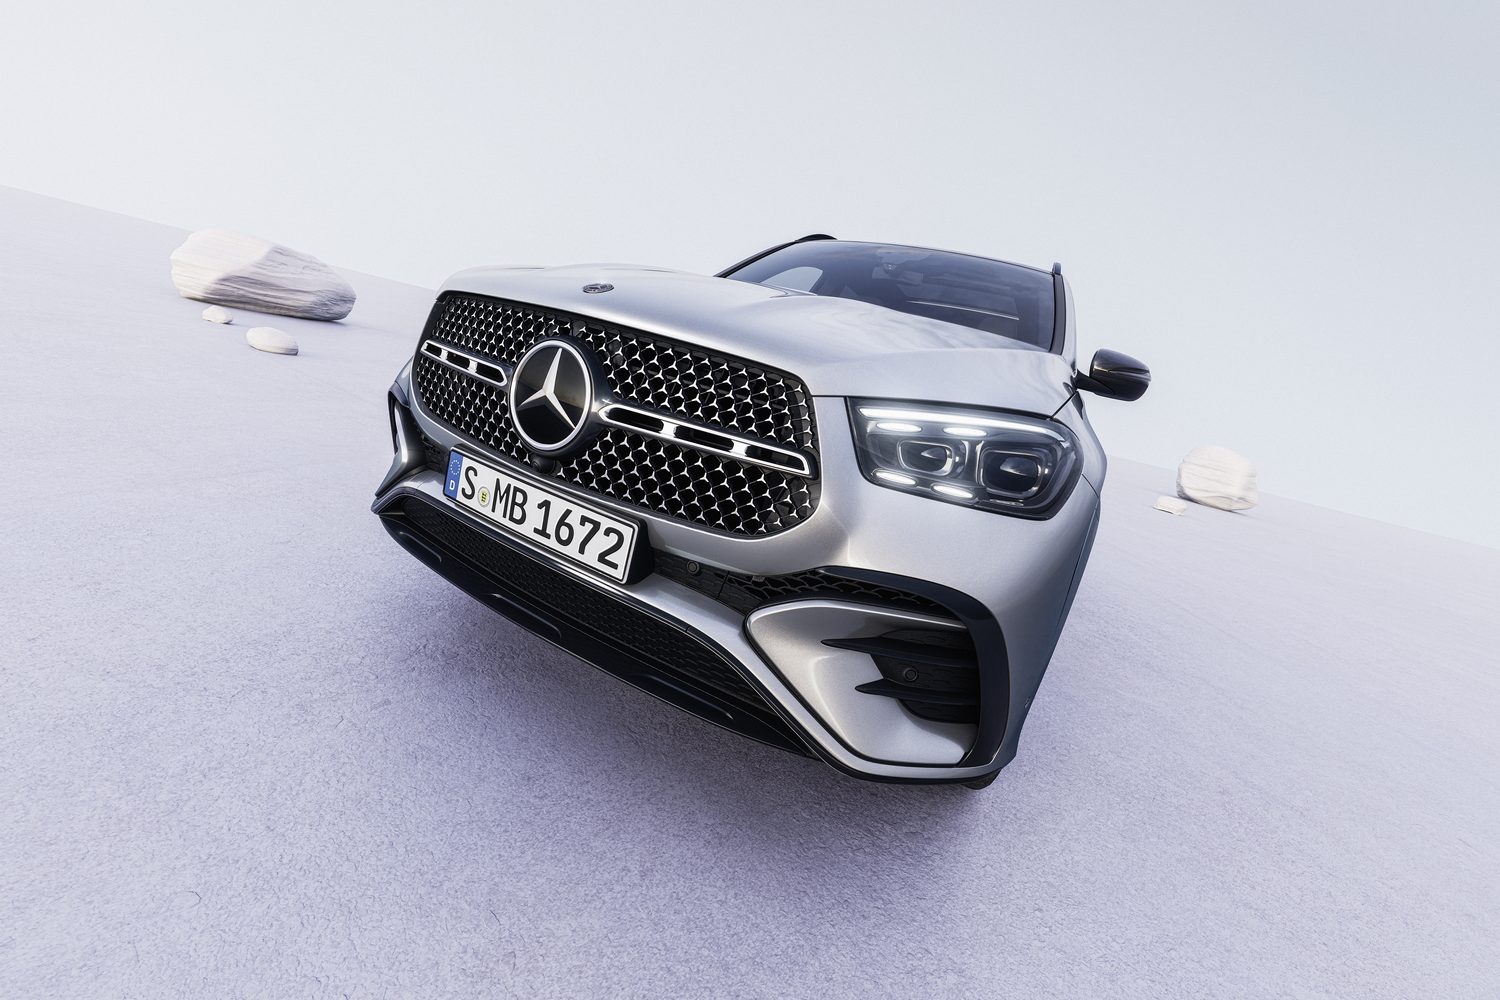 Mercedes upgrades the GLE and GLE Coupe